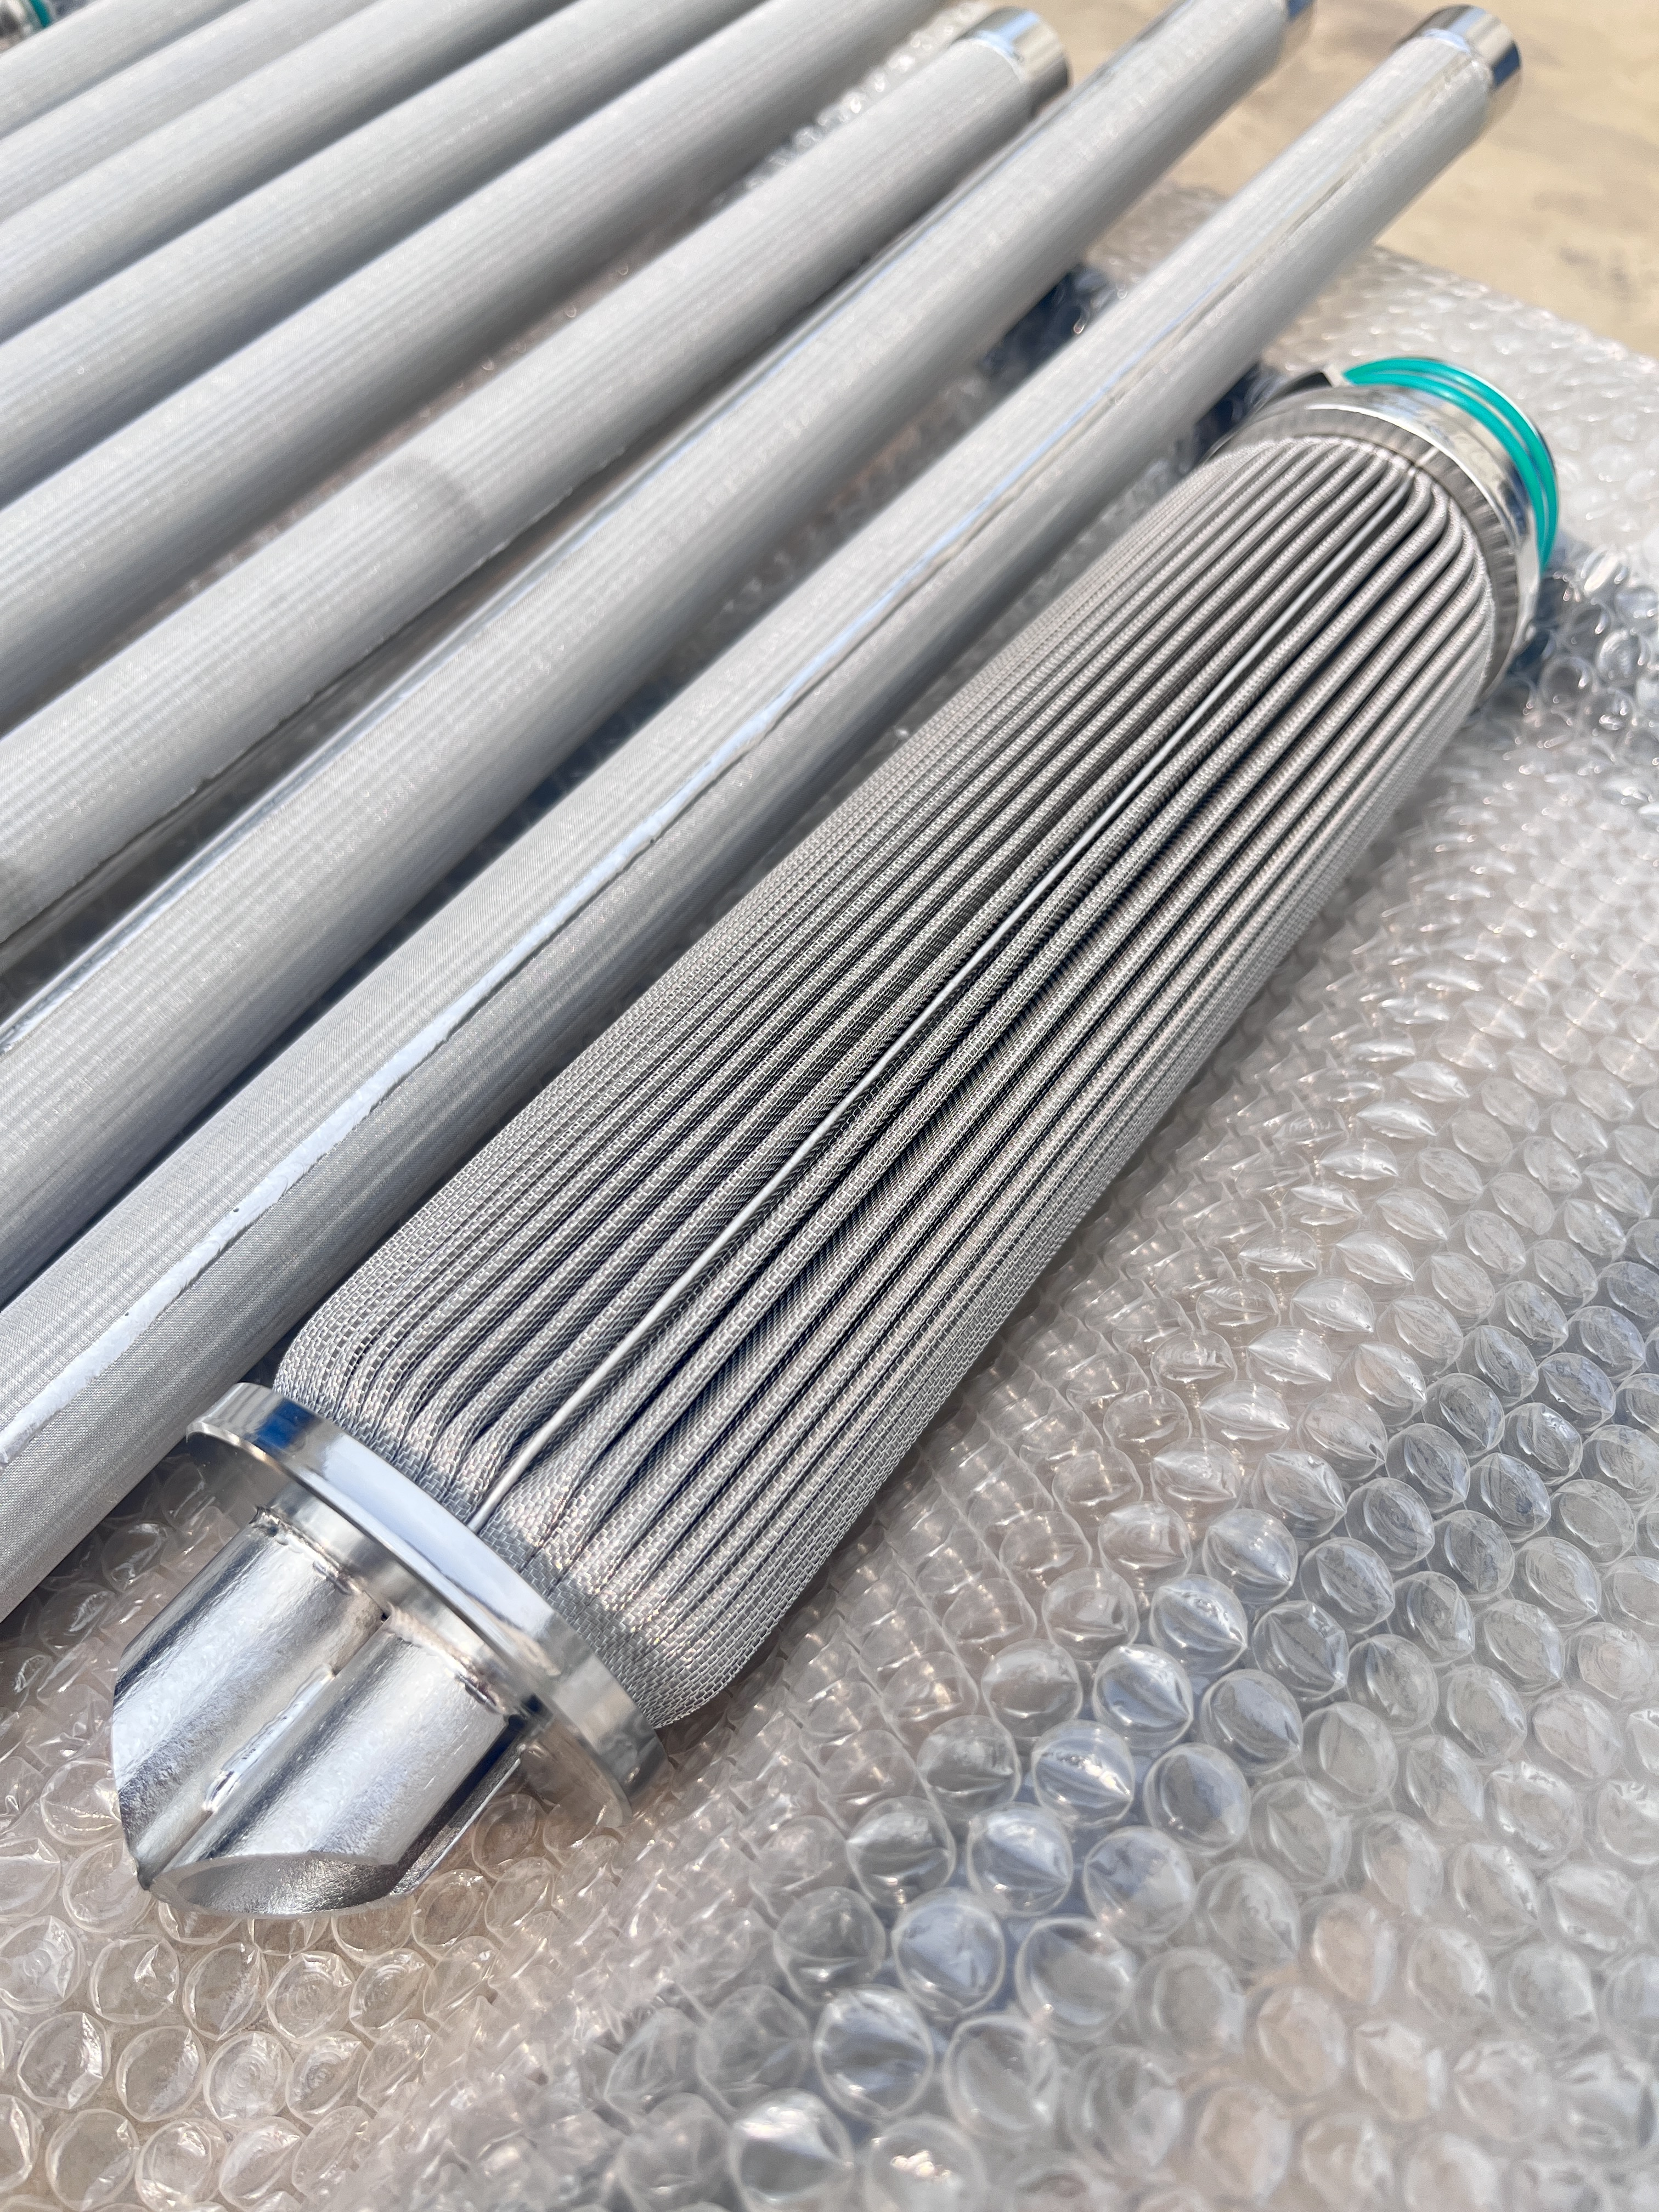 General purpose and characteristics of melt filter element